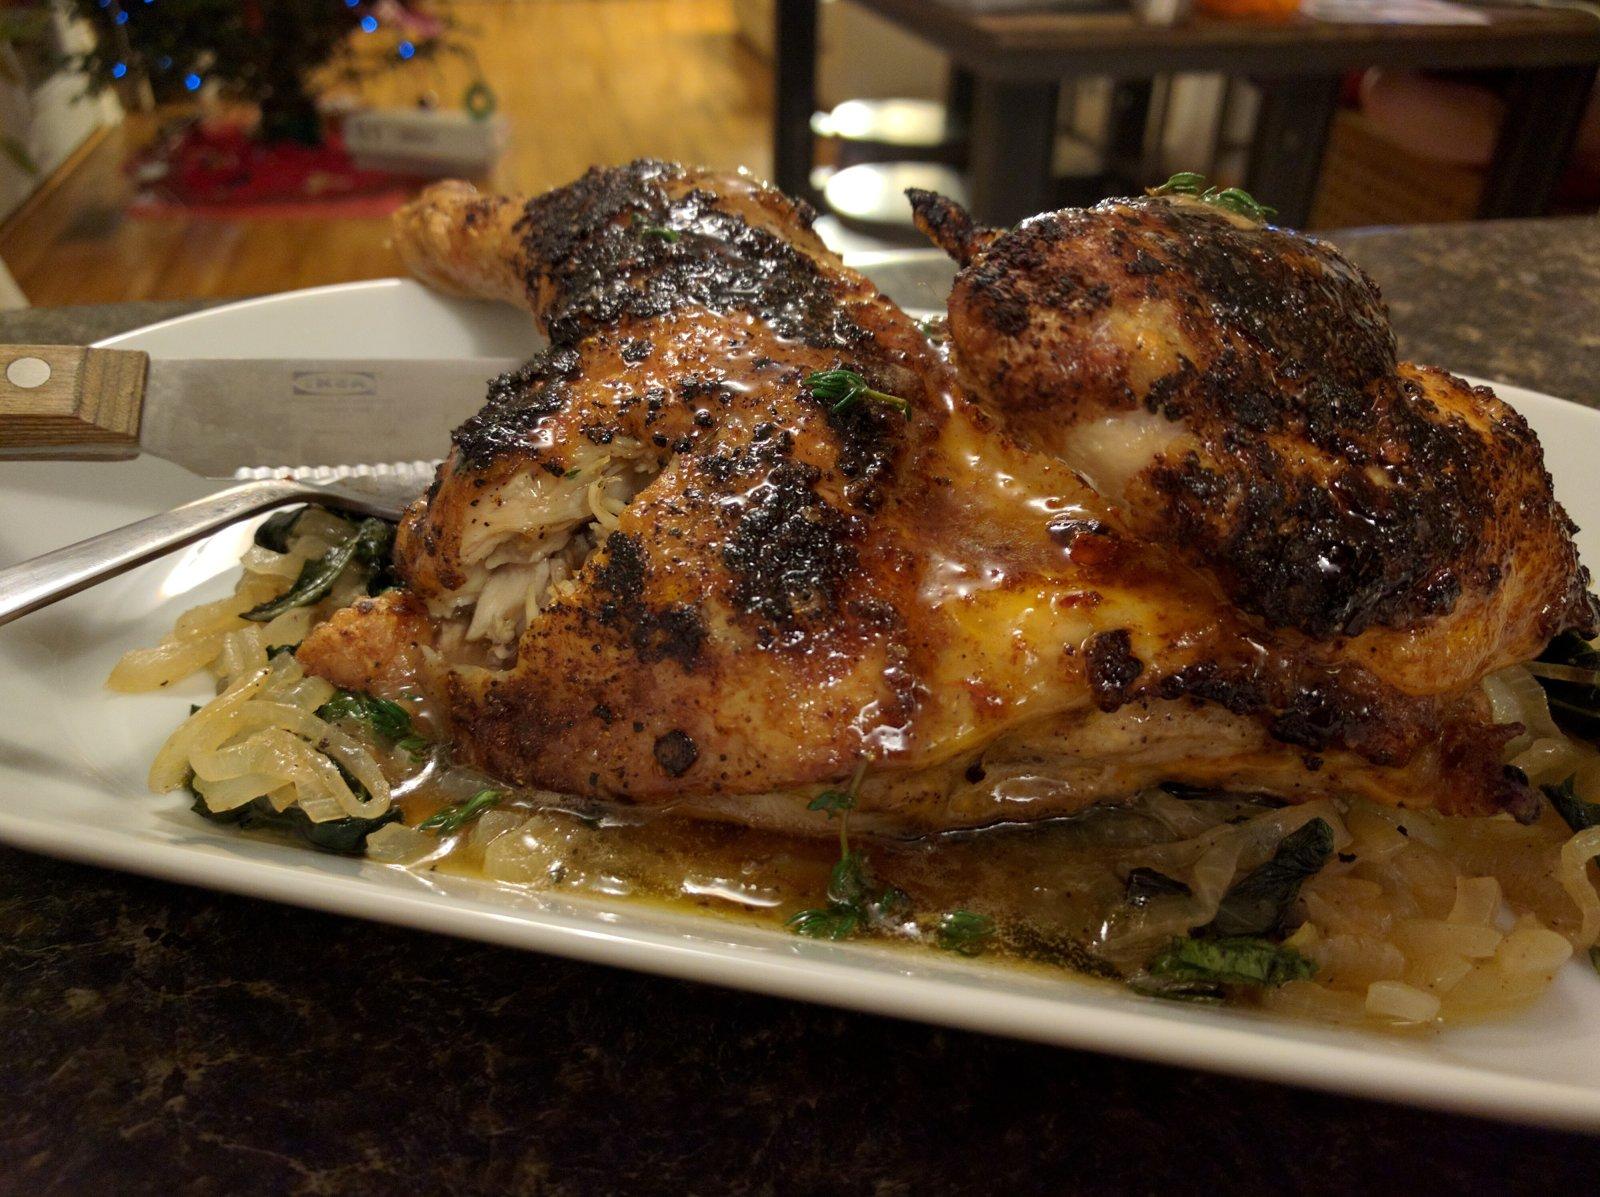 The big winner from Blue Apron, Chicken, Collard Greens and a Maple Glaze